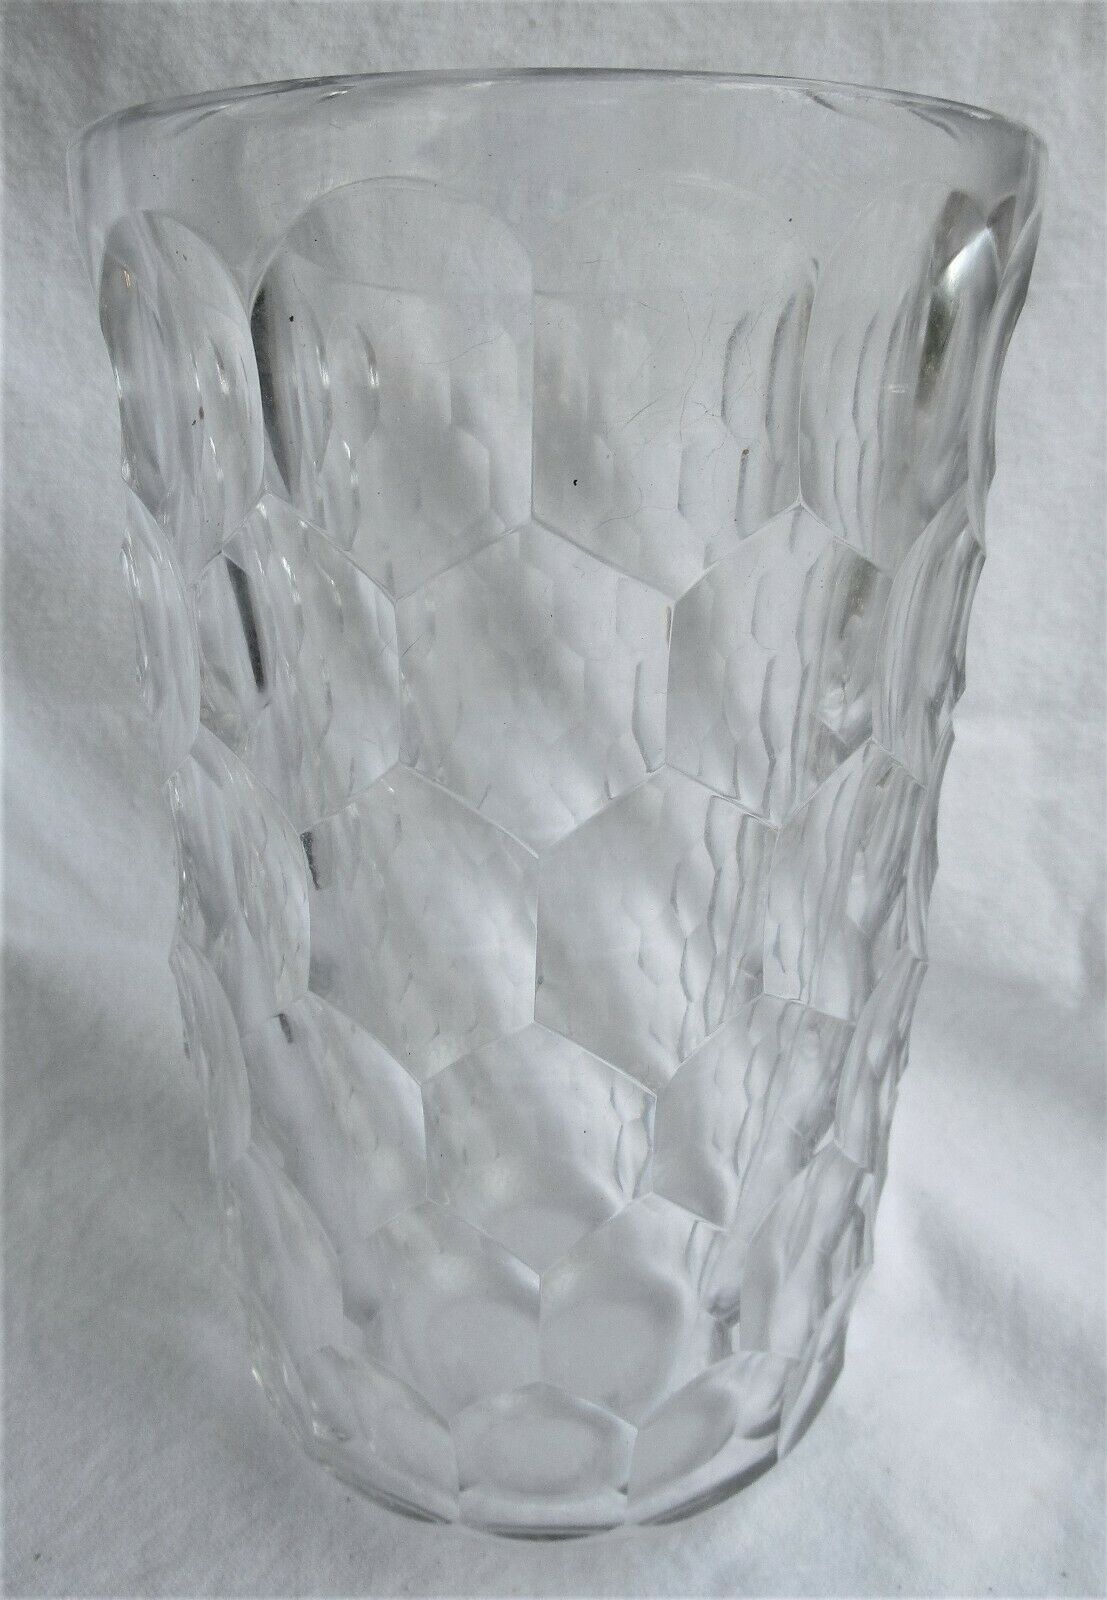 Signed Neiman Marcus 8.5" Crystal Vase Honeycomb Cut Glass Riedel (?) Large Tall